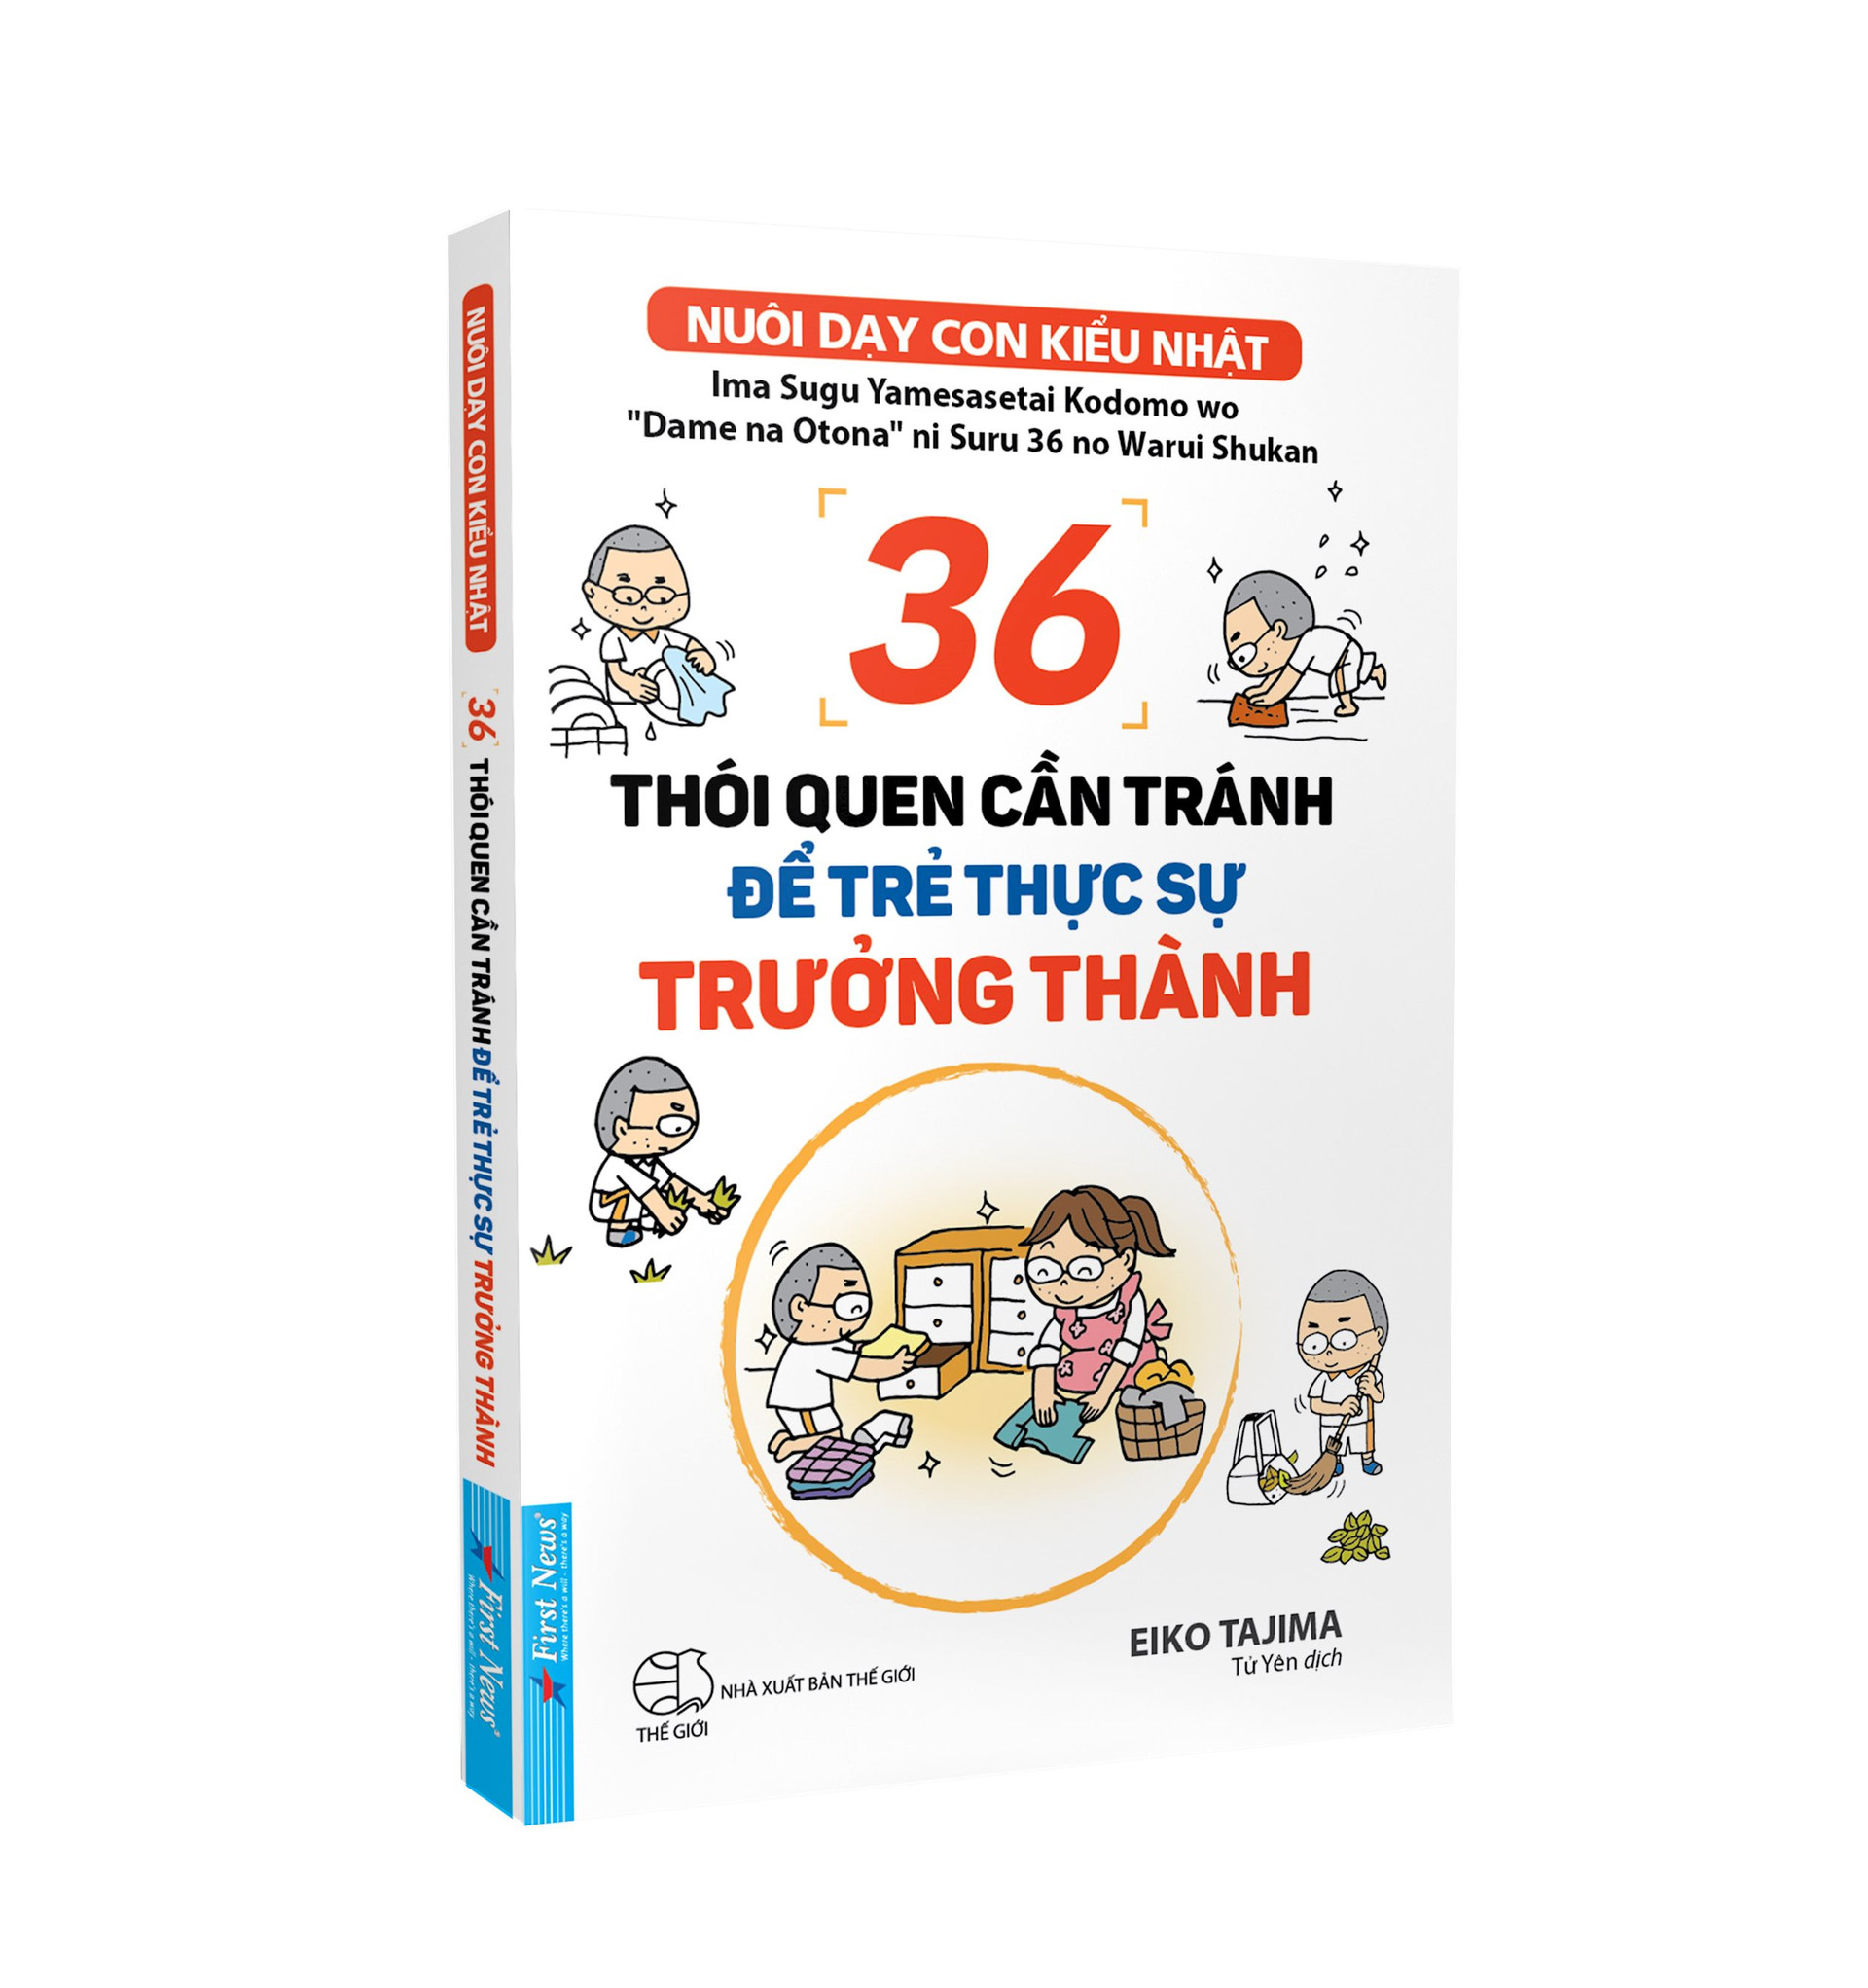 3d_36thoiquencantranhdetrethucsutruongthanh.jpg